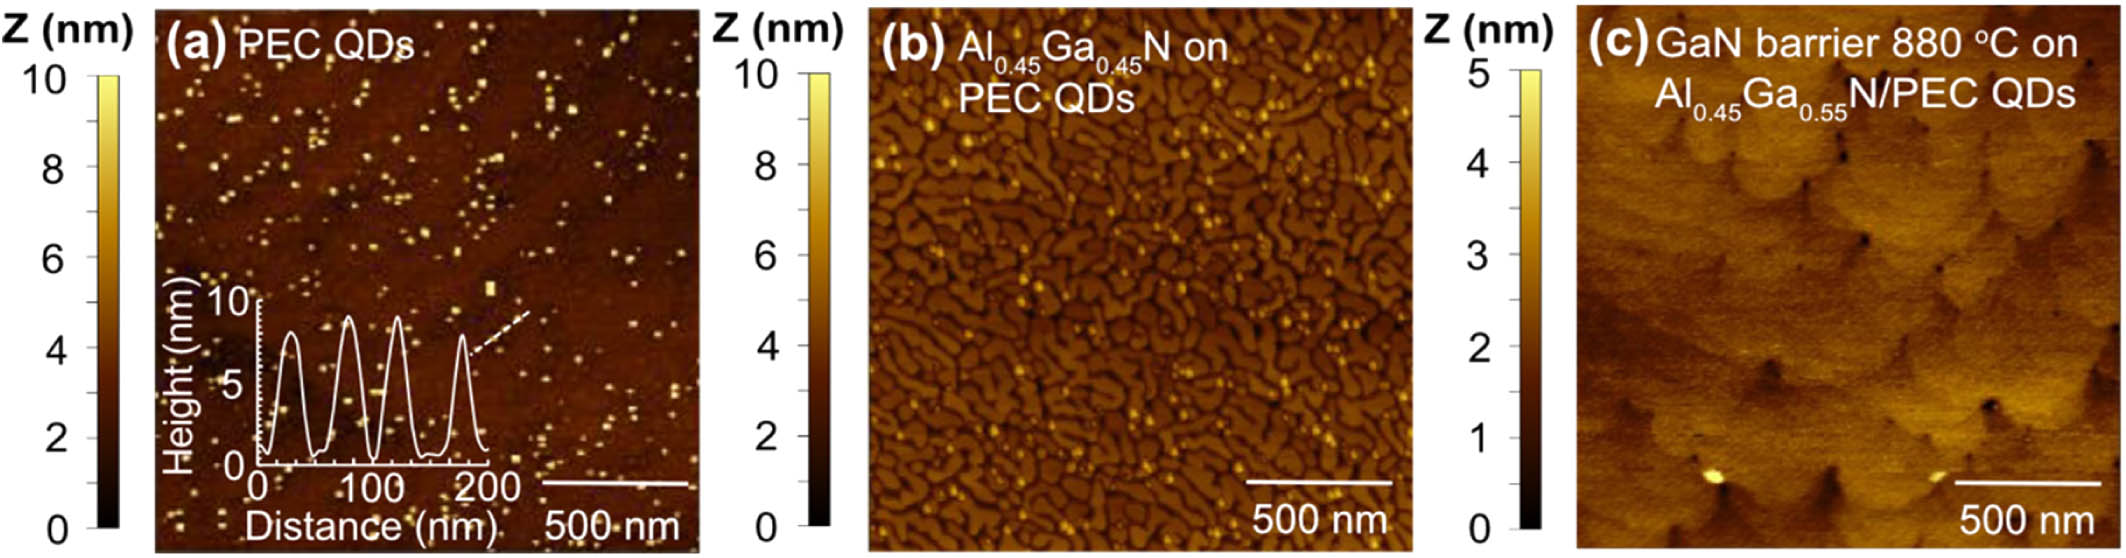 Atomic force microscope (AFM) images of a PEC QD template at different synthesized steps: (a) PEC QDs after etching, (b) PEC QDs with Al0.45Ga0.55N grown at 730°C and annealed at 880°C, and (c) PEC QDs with Al0.45Ga0.55N grown at 730°C and GaN barrier grown at 880°C. The AFM images demonstrate that Al0.45Ga0.55N can protect the PEC QDs against collapse.